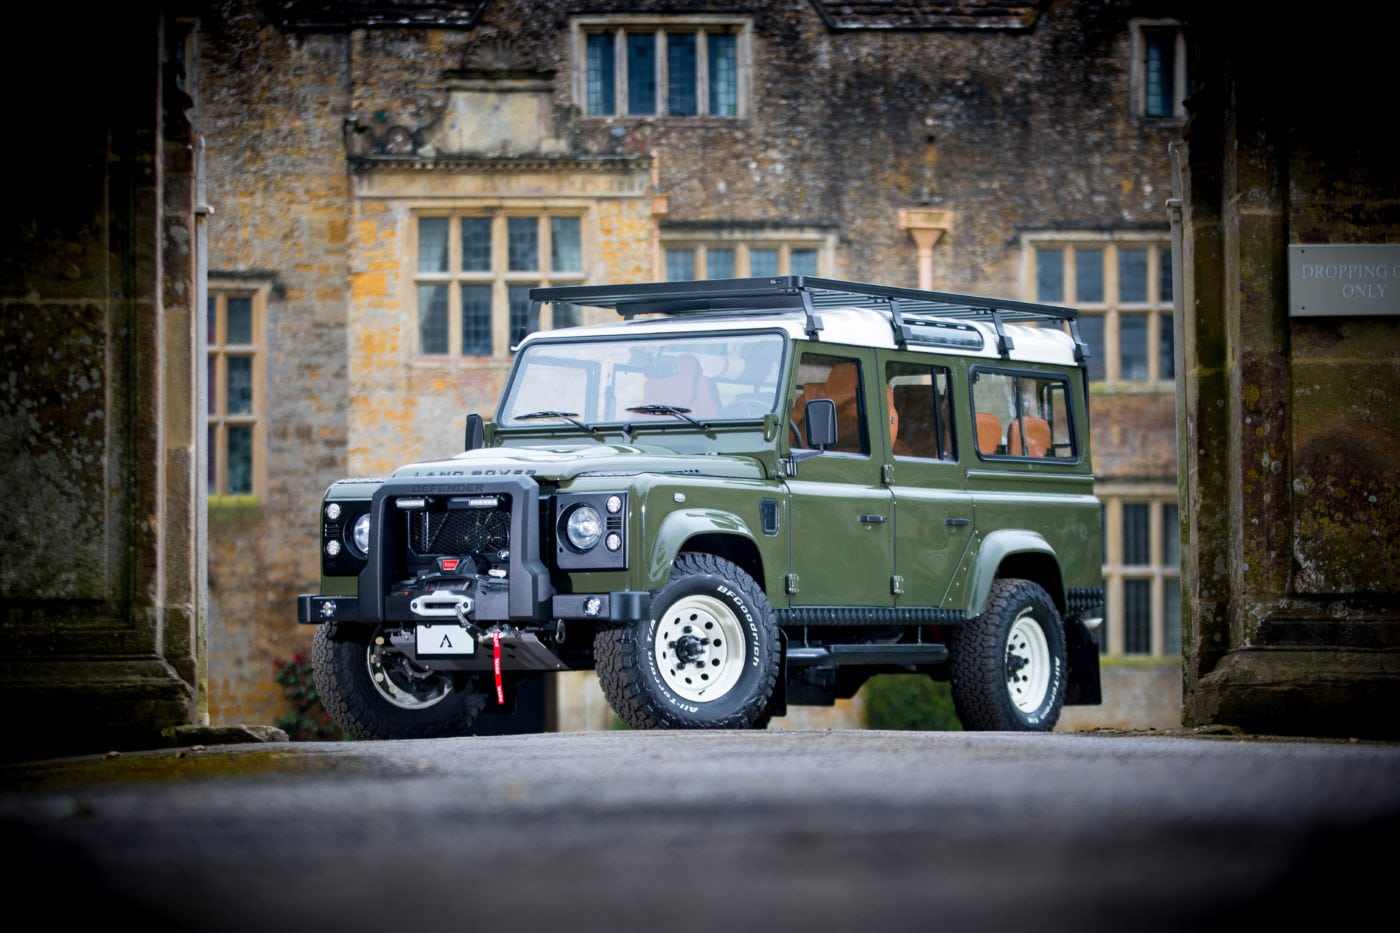 This Defender 90 is kitted out for action.